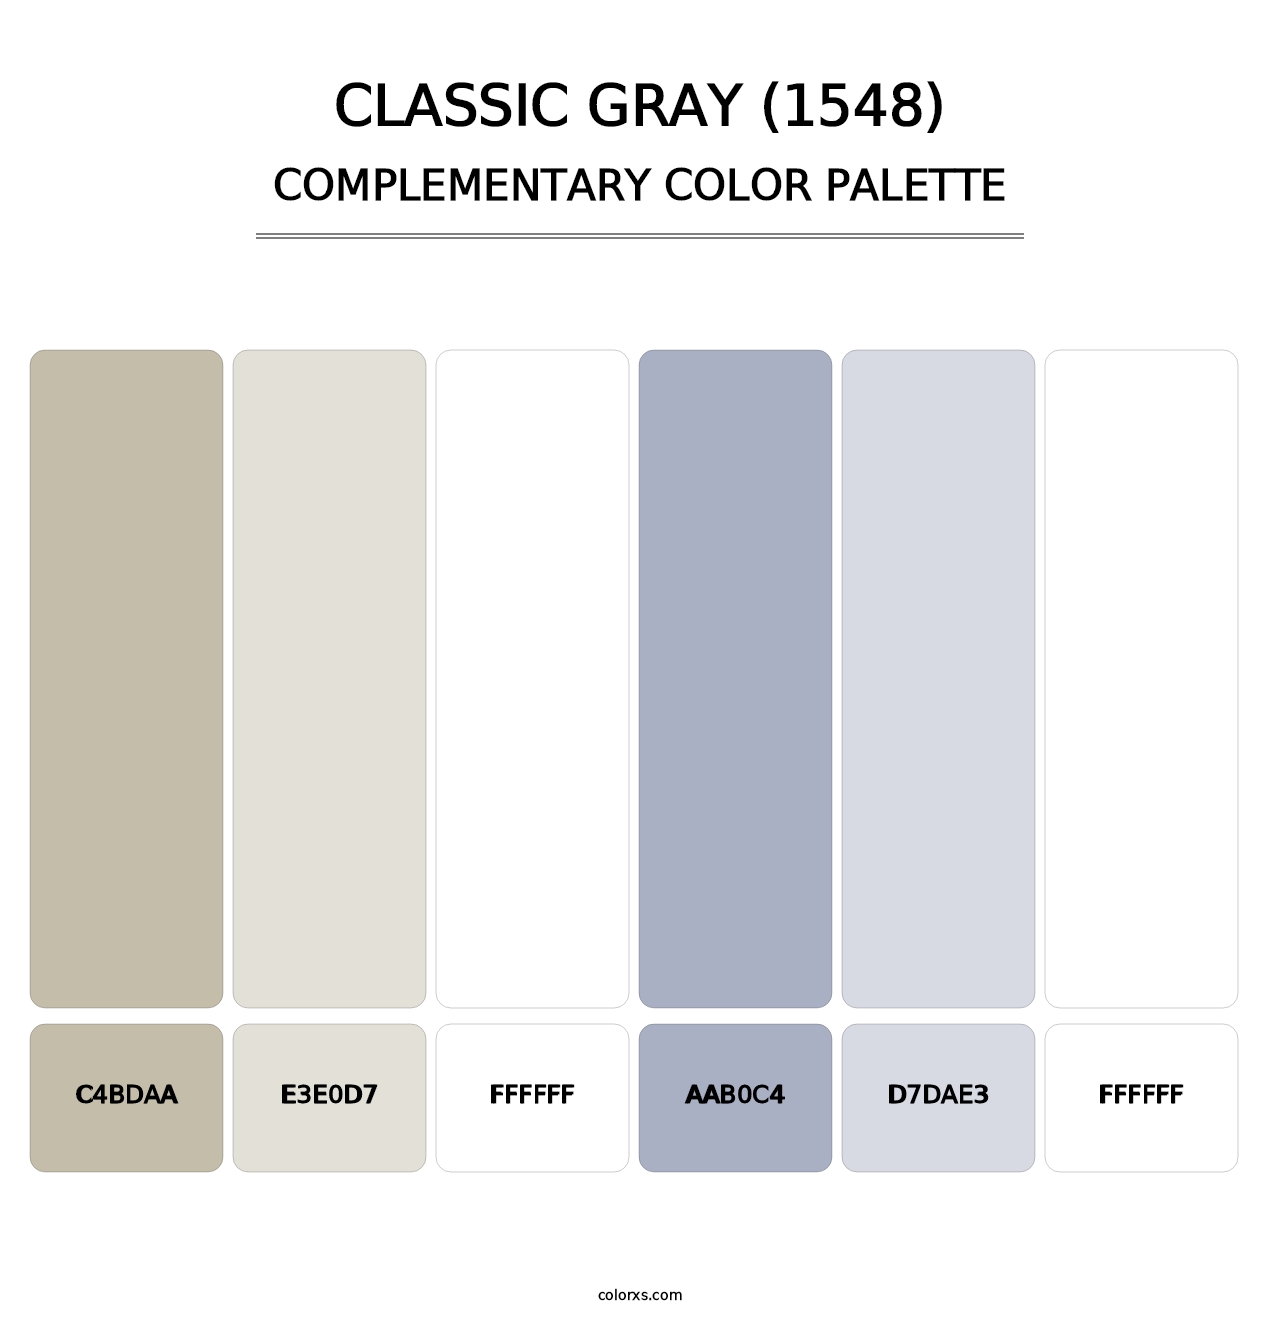 Classic Gray (1548) - Complementary Color Palette